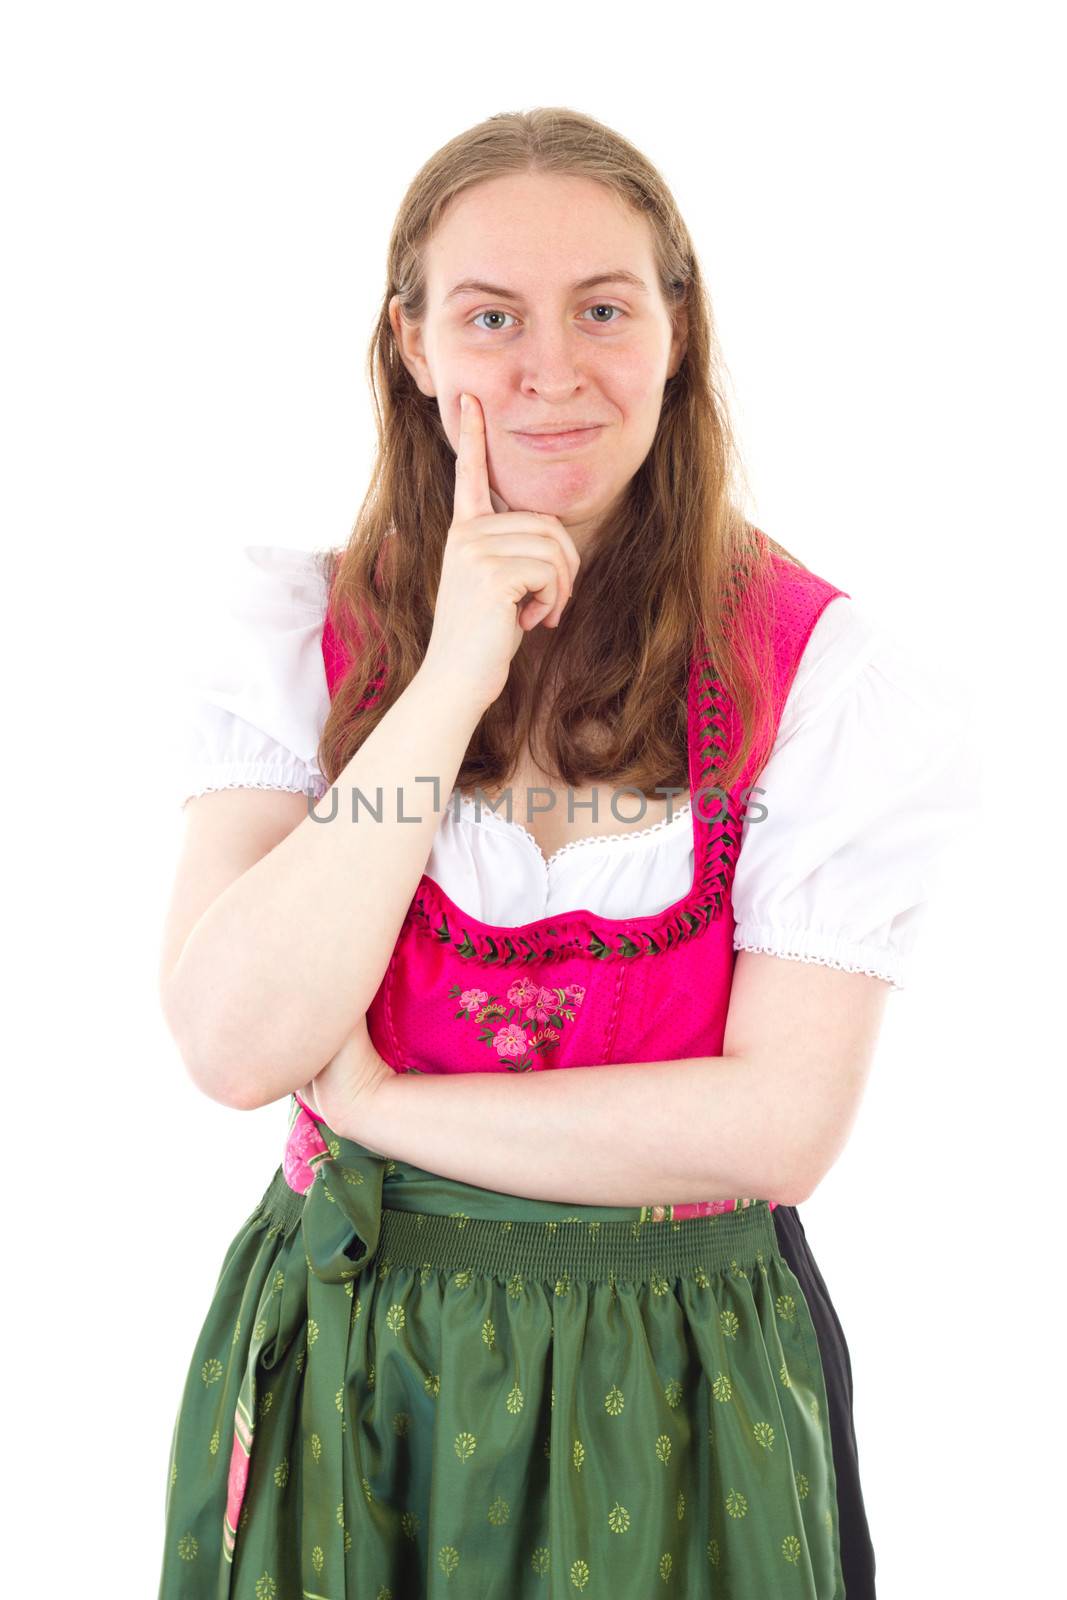 Lucky woman in dirndl has found the right idea by gwolters